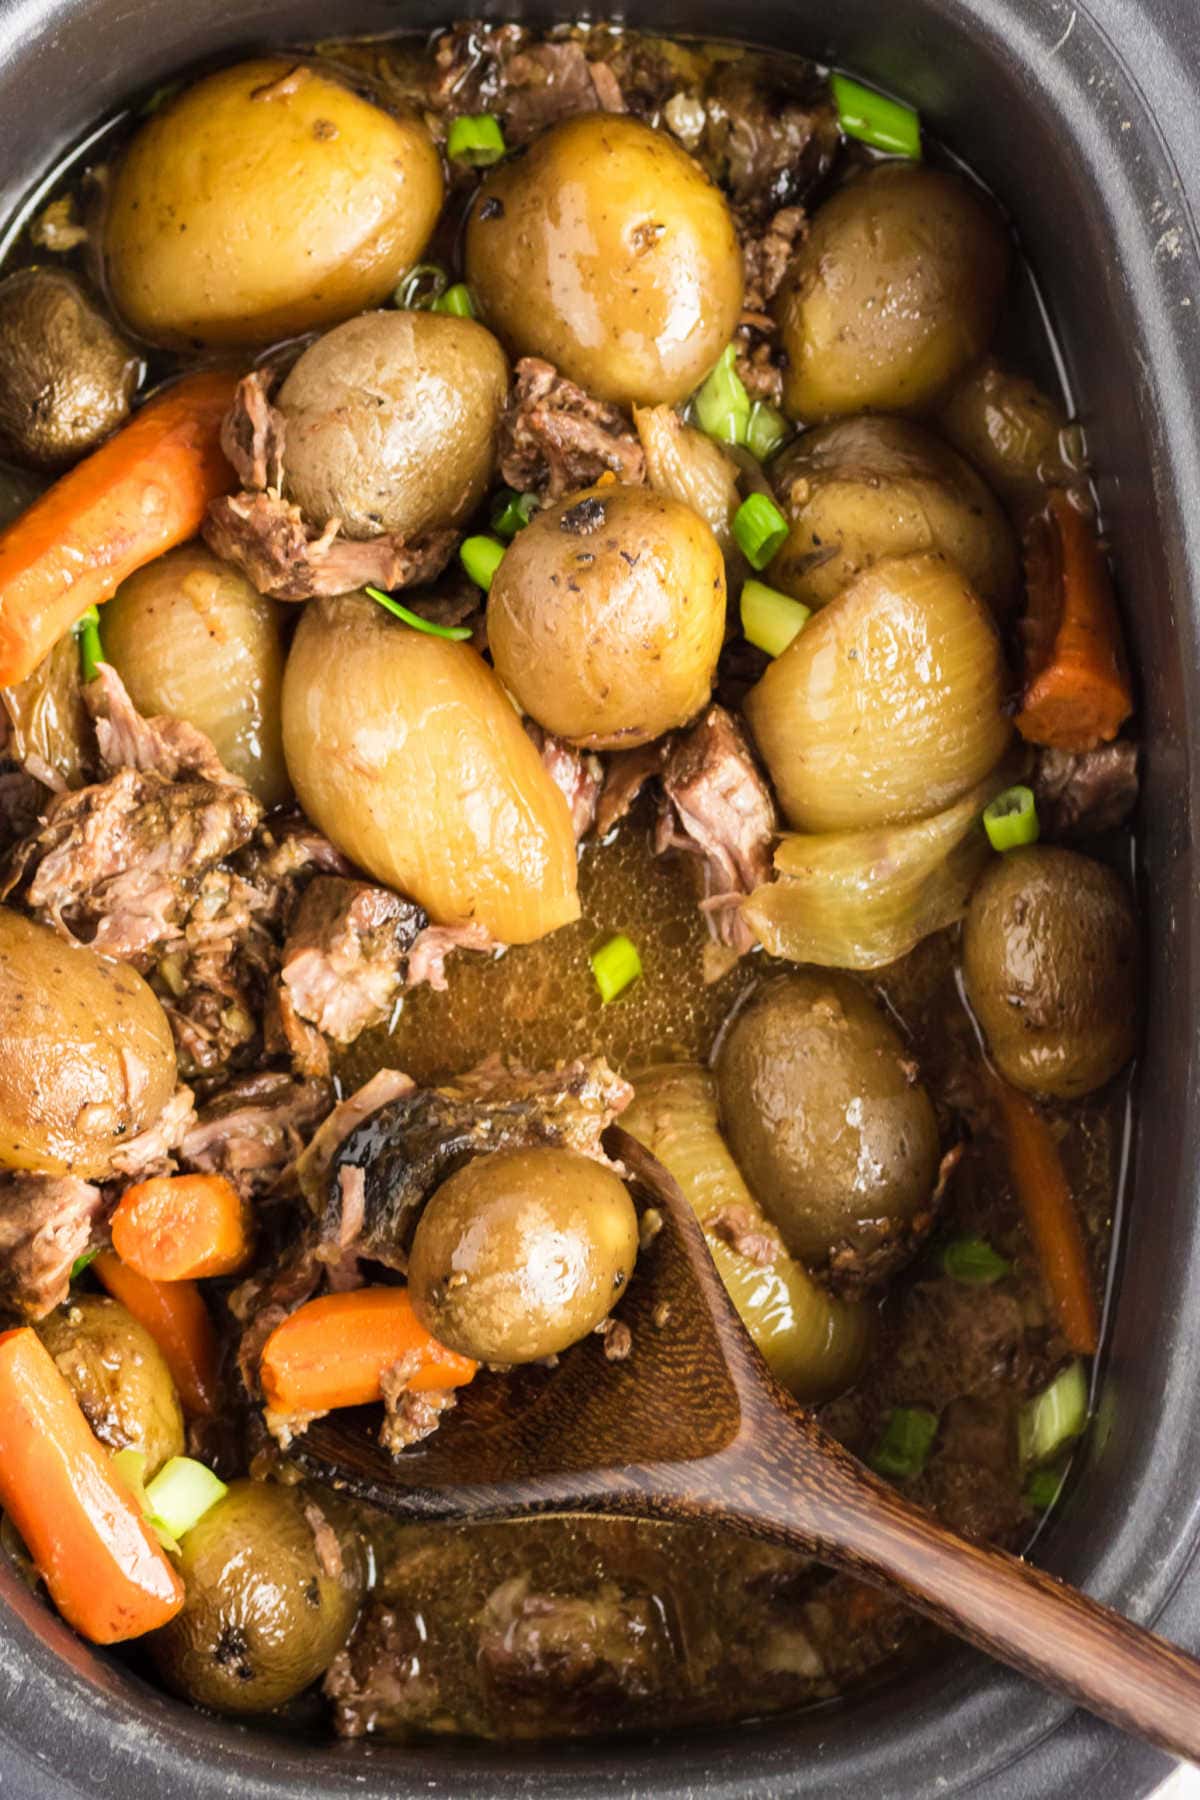 An overhead shot of a crockpot filled with beef stew, including baby potatoes, carrots, and pieces of beef.